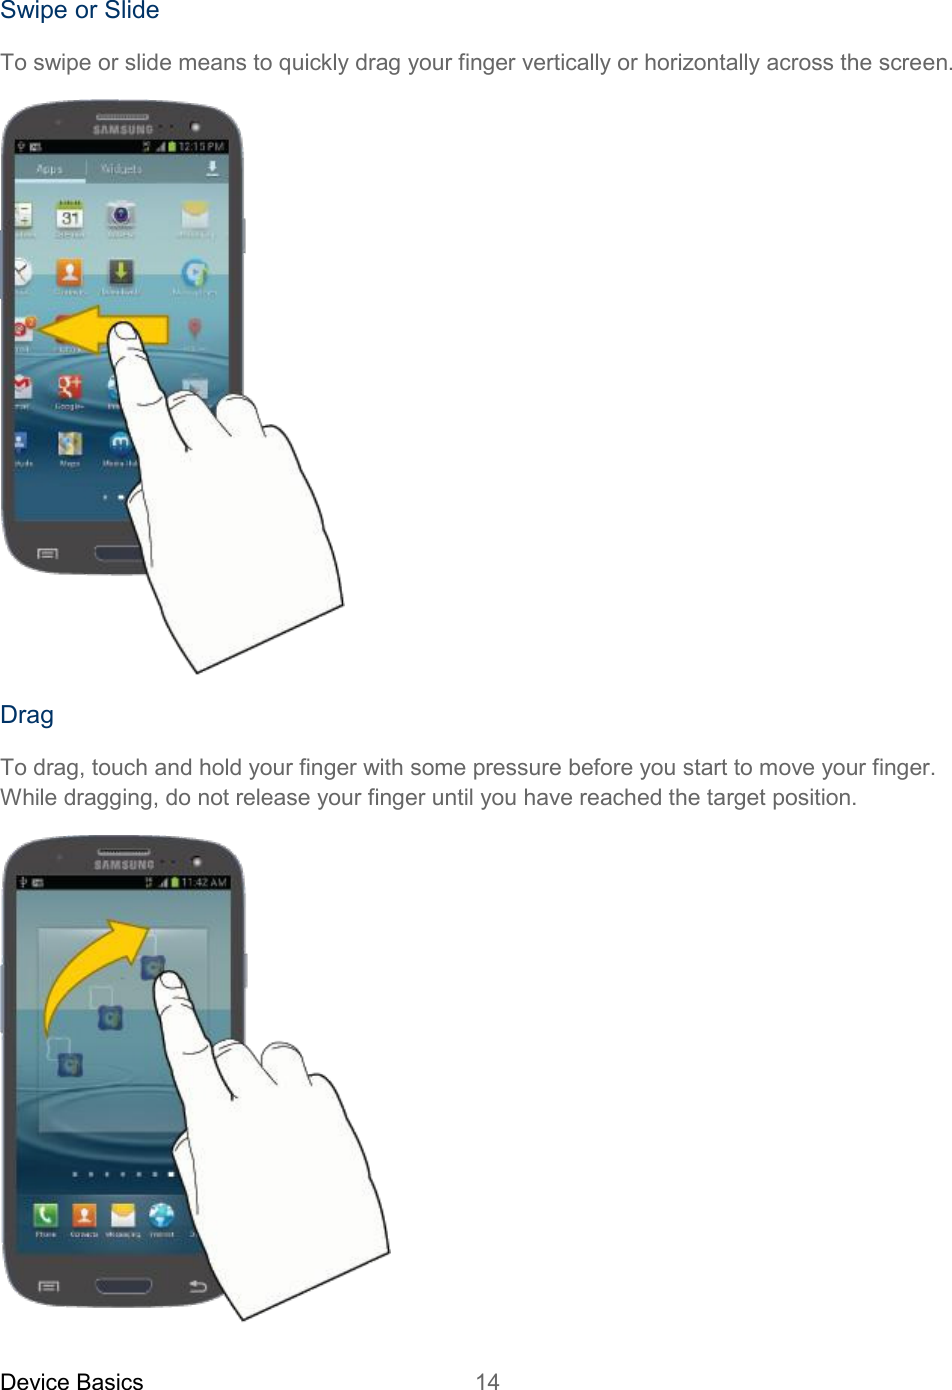 Device Basics 14   Swipe or Slide To swipe or slide means to quickly drag your finger vertically or horizontally across the screen.  Drag To drag, touch and hold your finger with some pressure before you start to move your finger. While dragging, do not release your finger until you have reached the target position.  